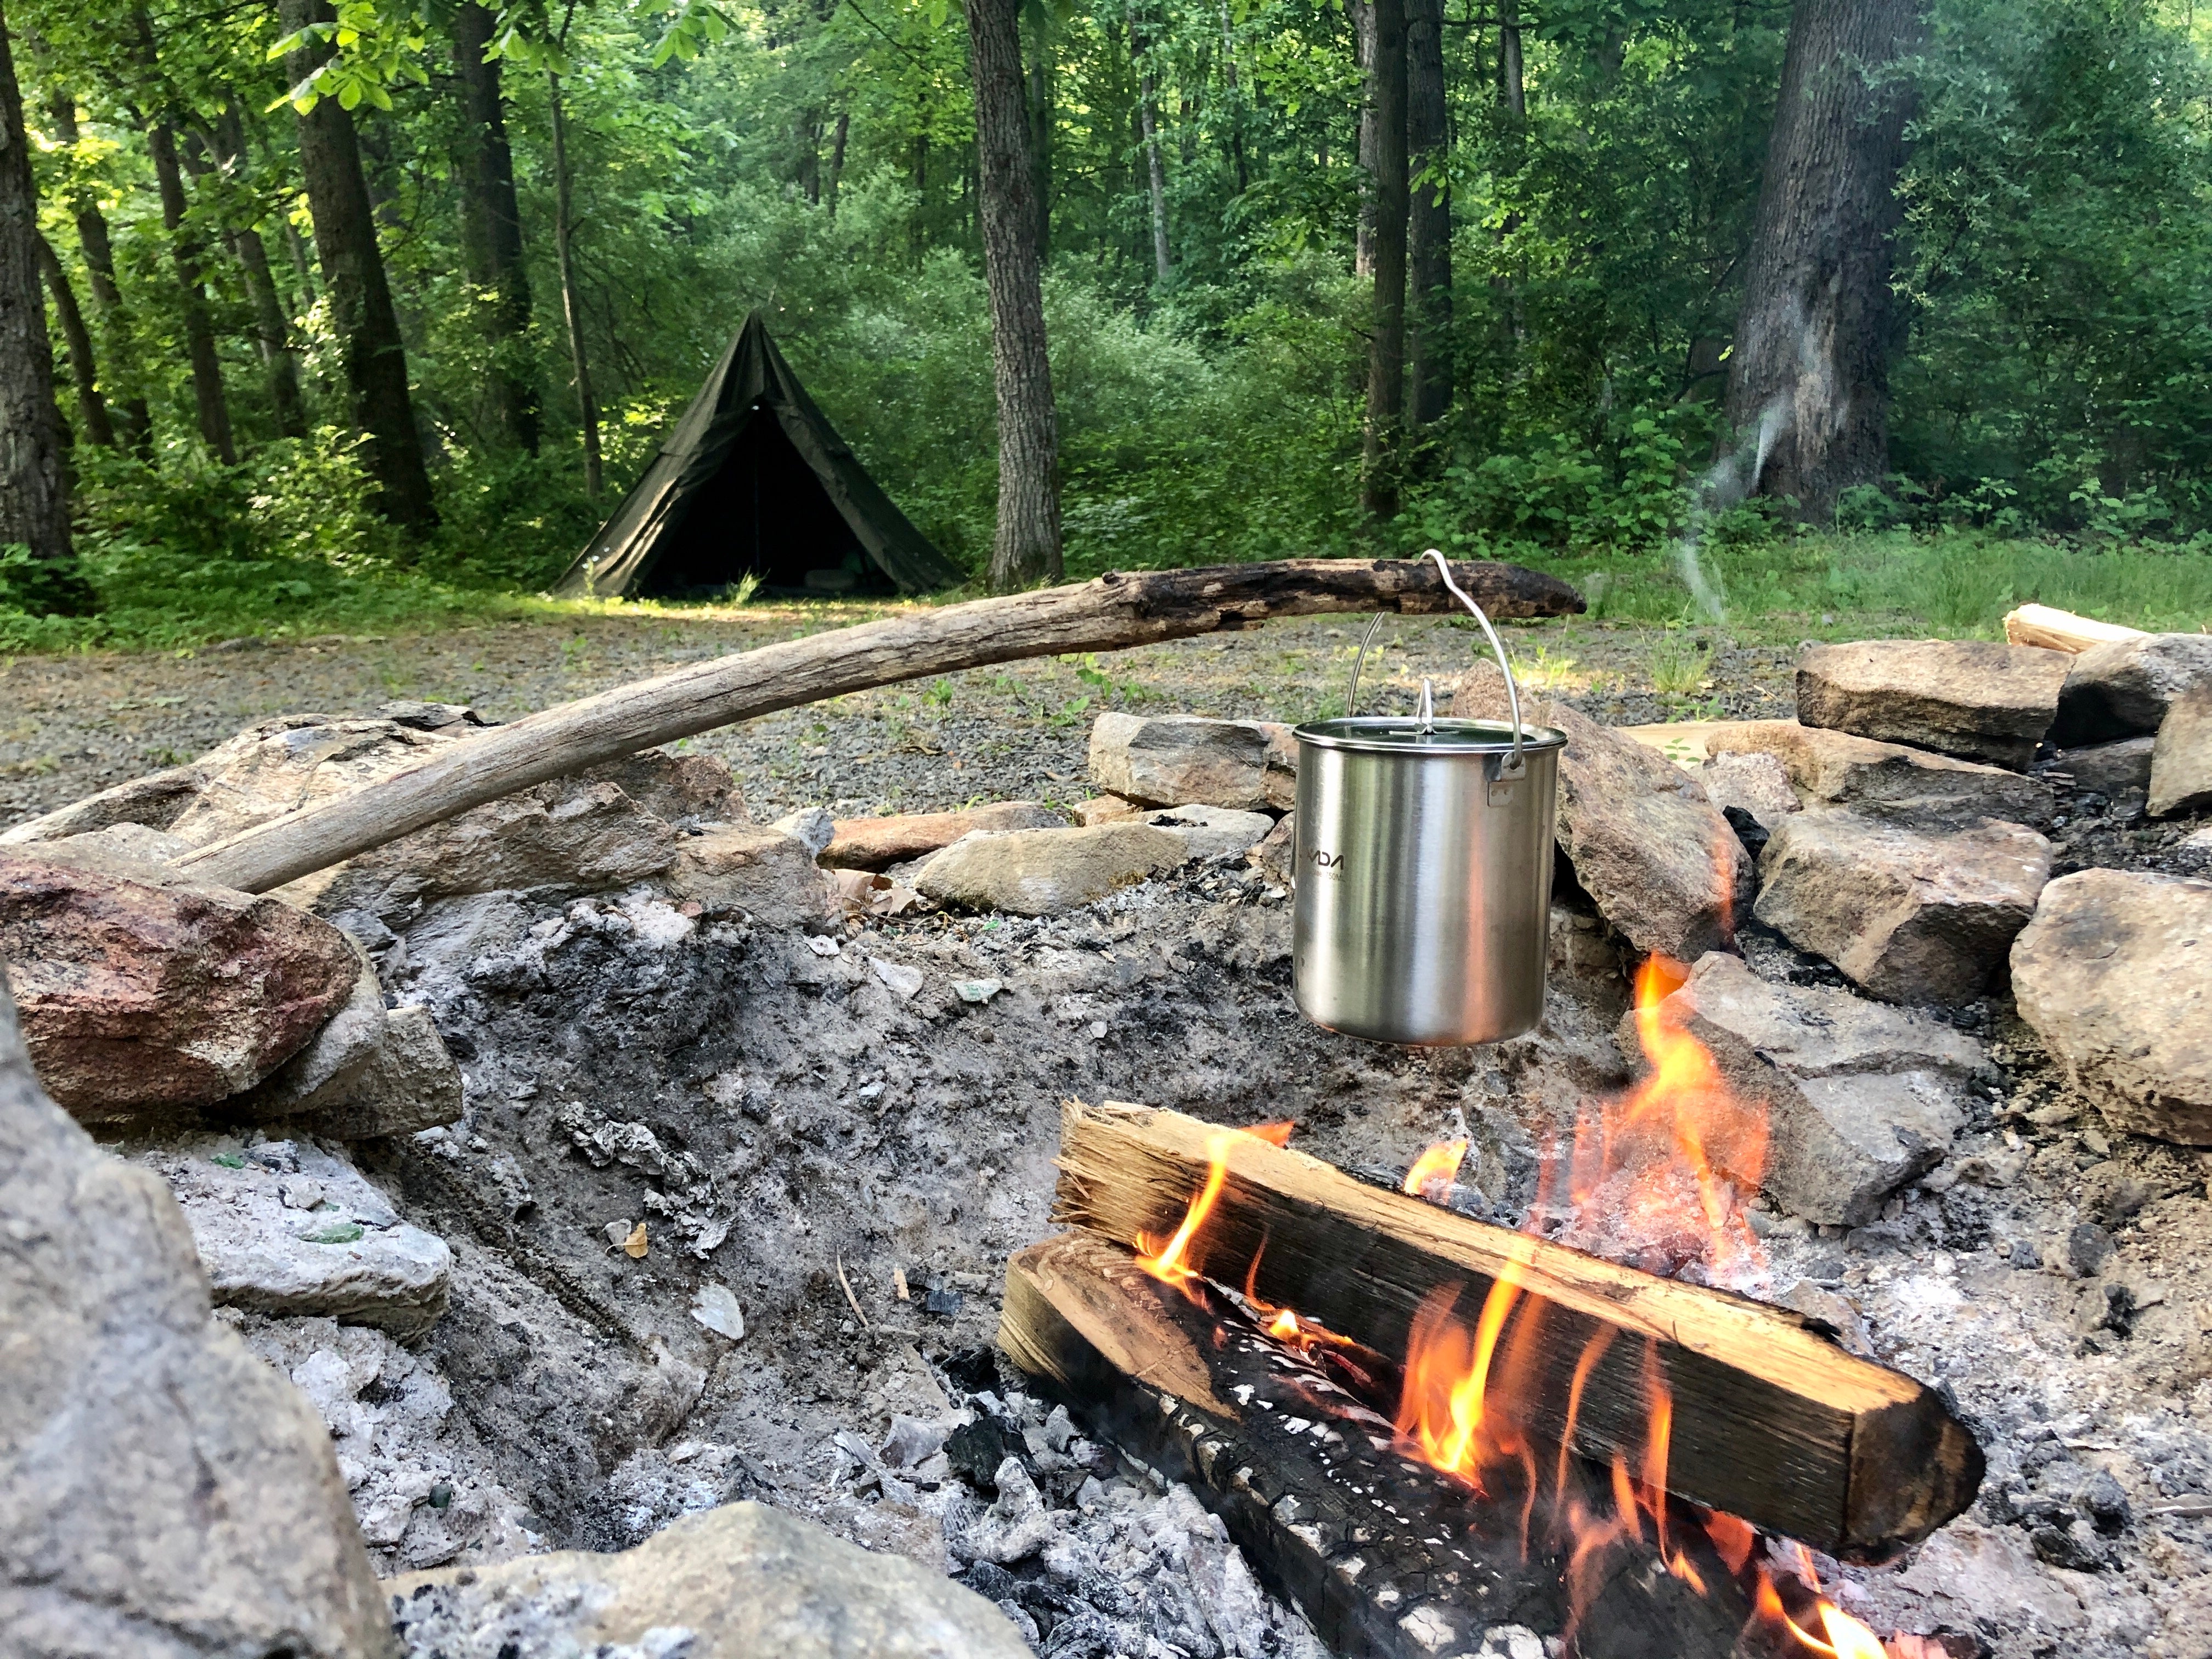 Fire cooking and sleeping under the trees